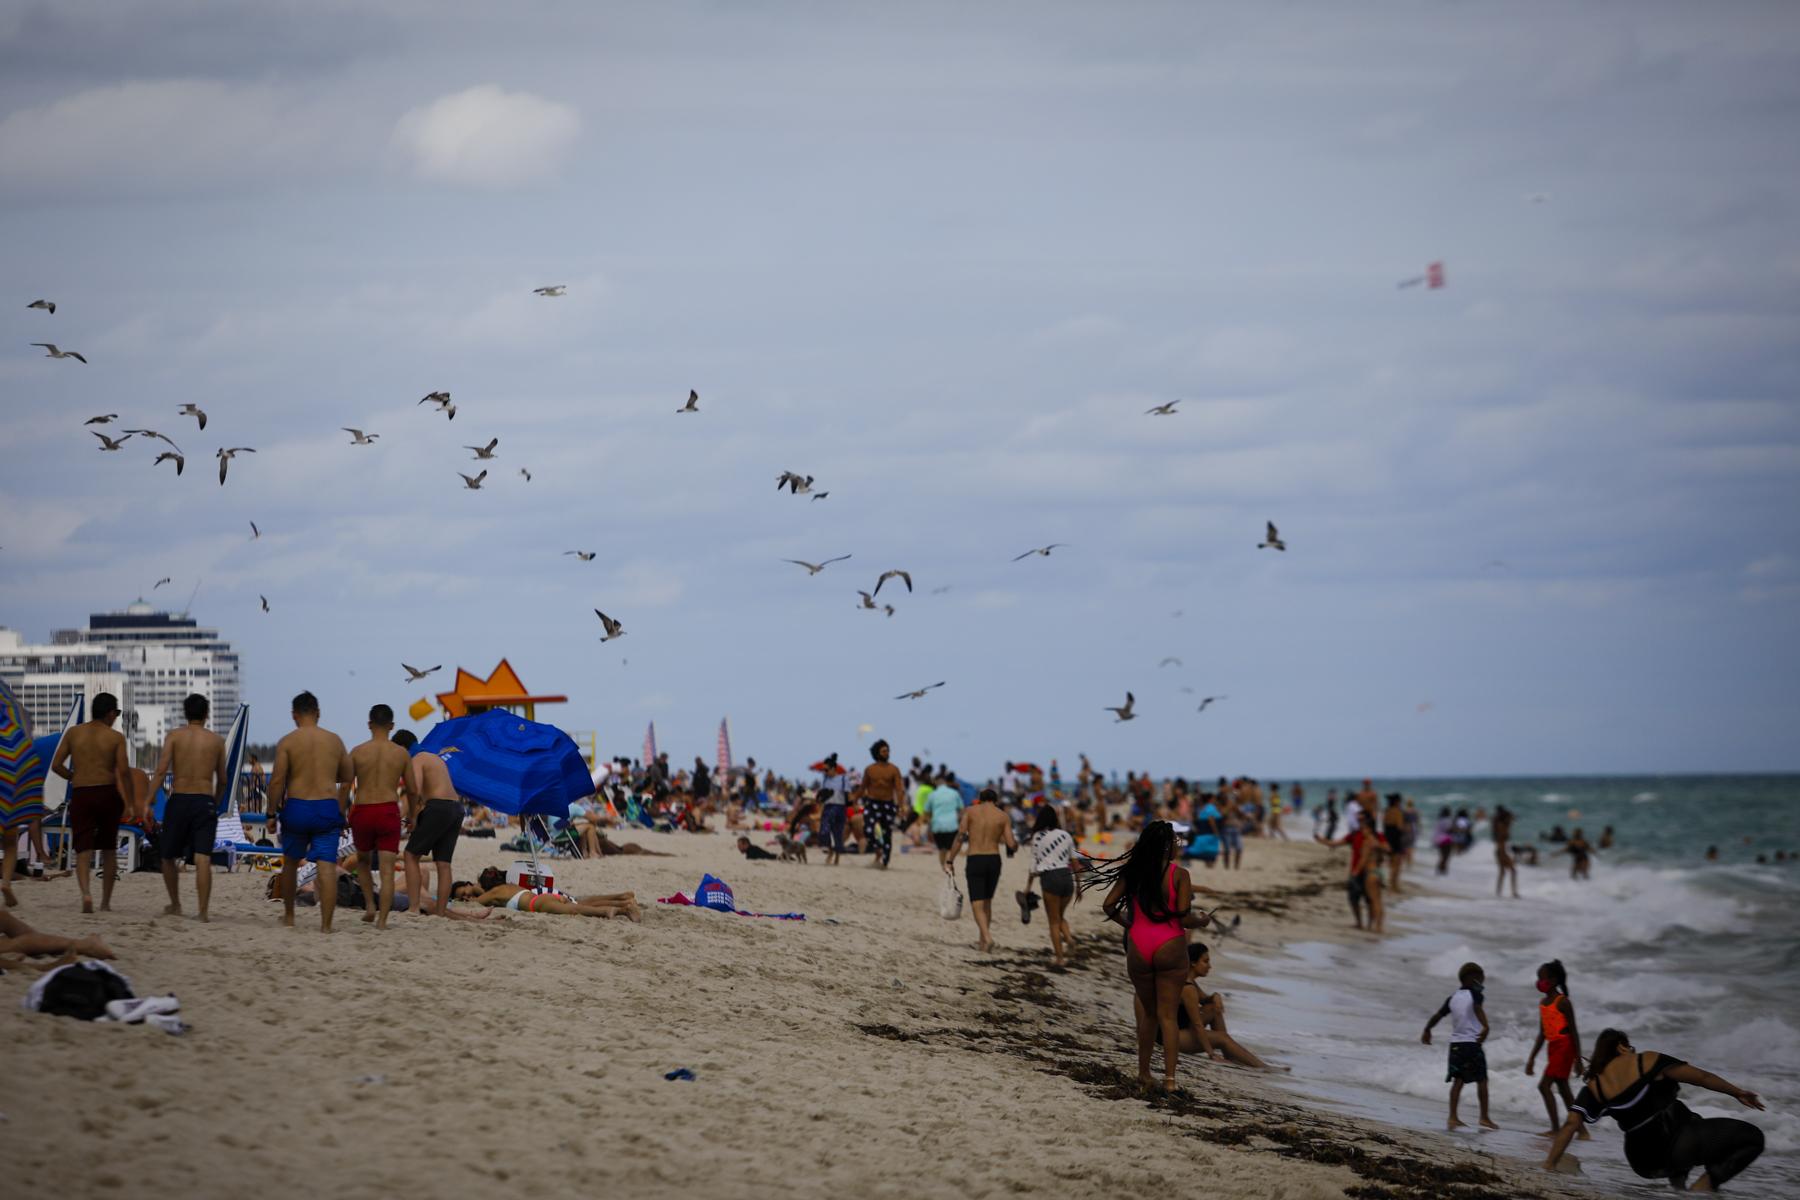 2021 Spring Break @ Miami Beach - Tourists are see on the beach during Spring Break in...